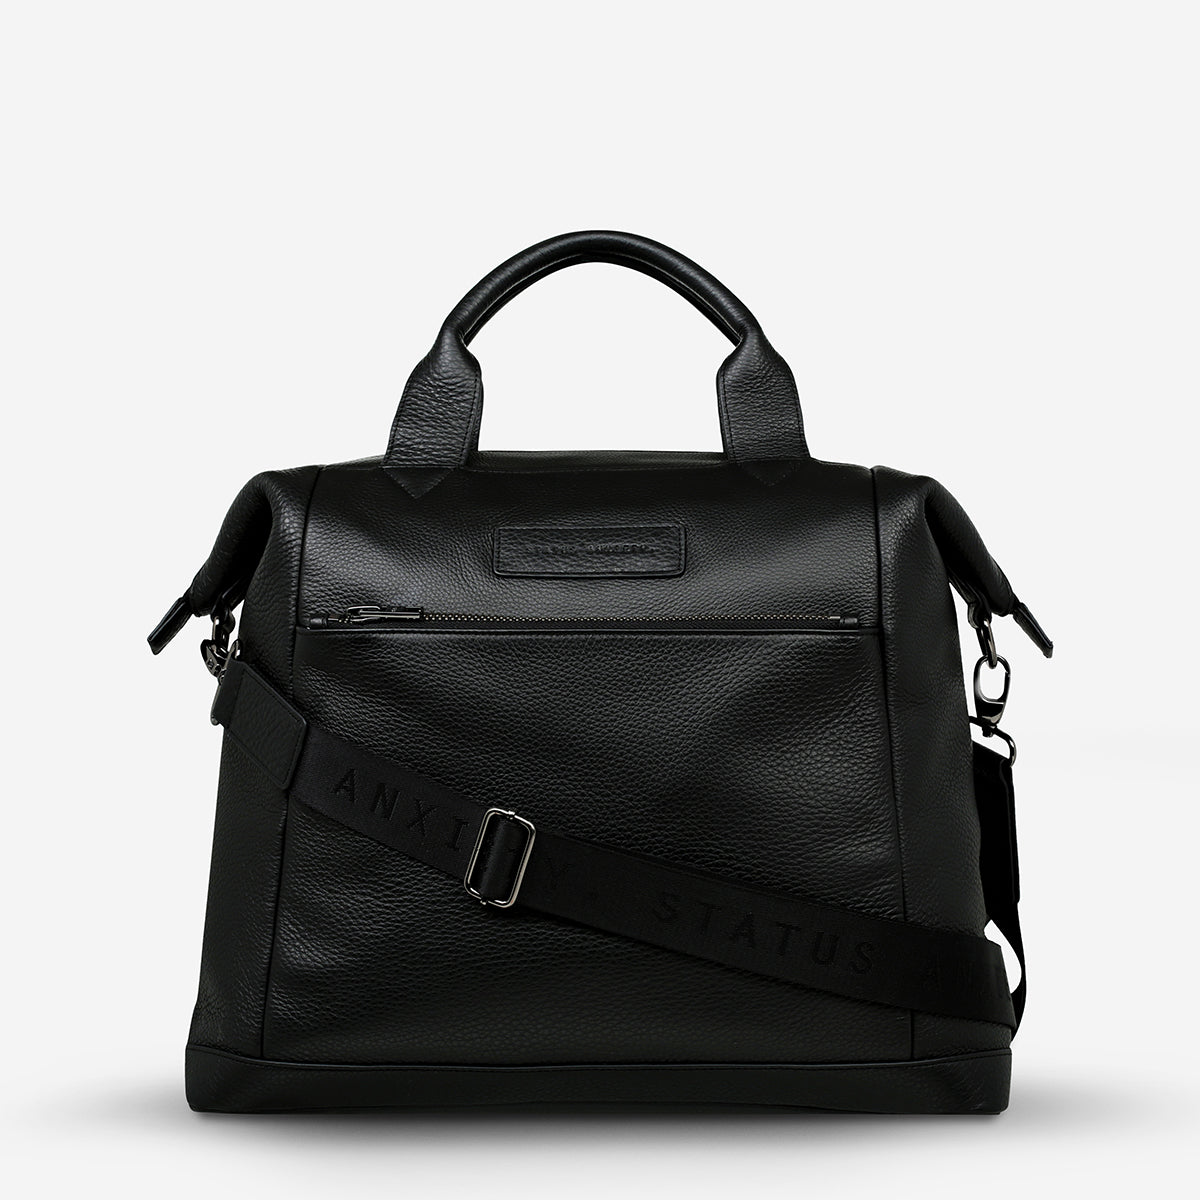 Women's Leather Bags  Shop Online at Status Anxiety®